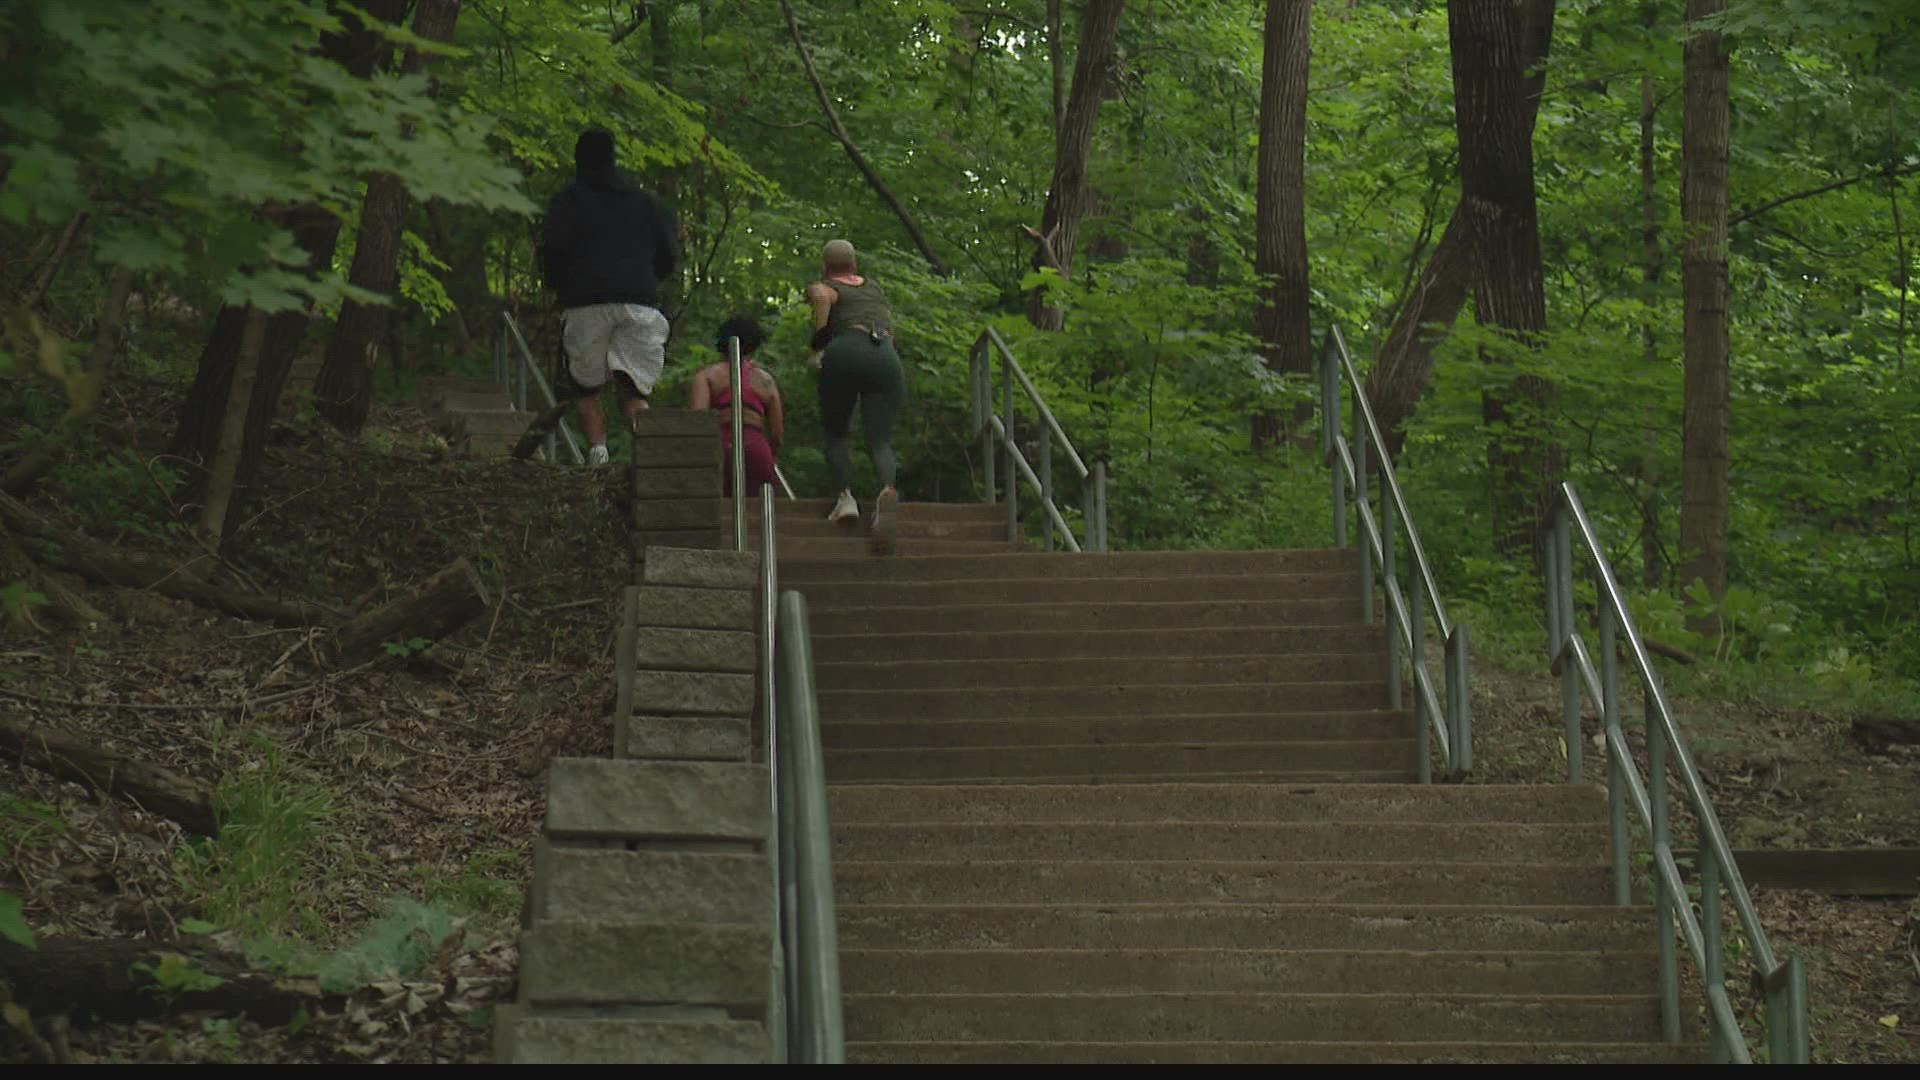 Rickkita Edwards climbs the 220 steps in Creve Coeur Park four times a week. The journey helped her transform her health and her life, for the better.